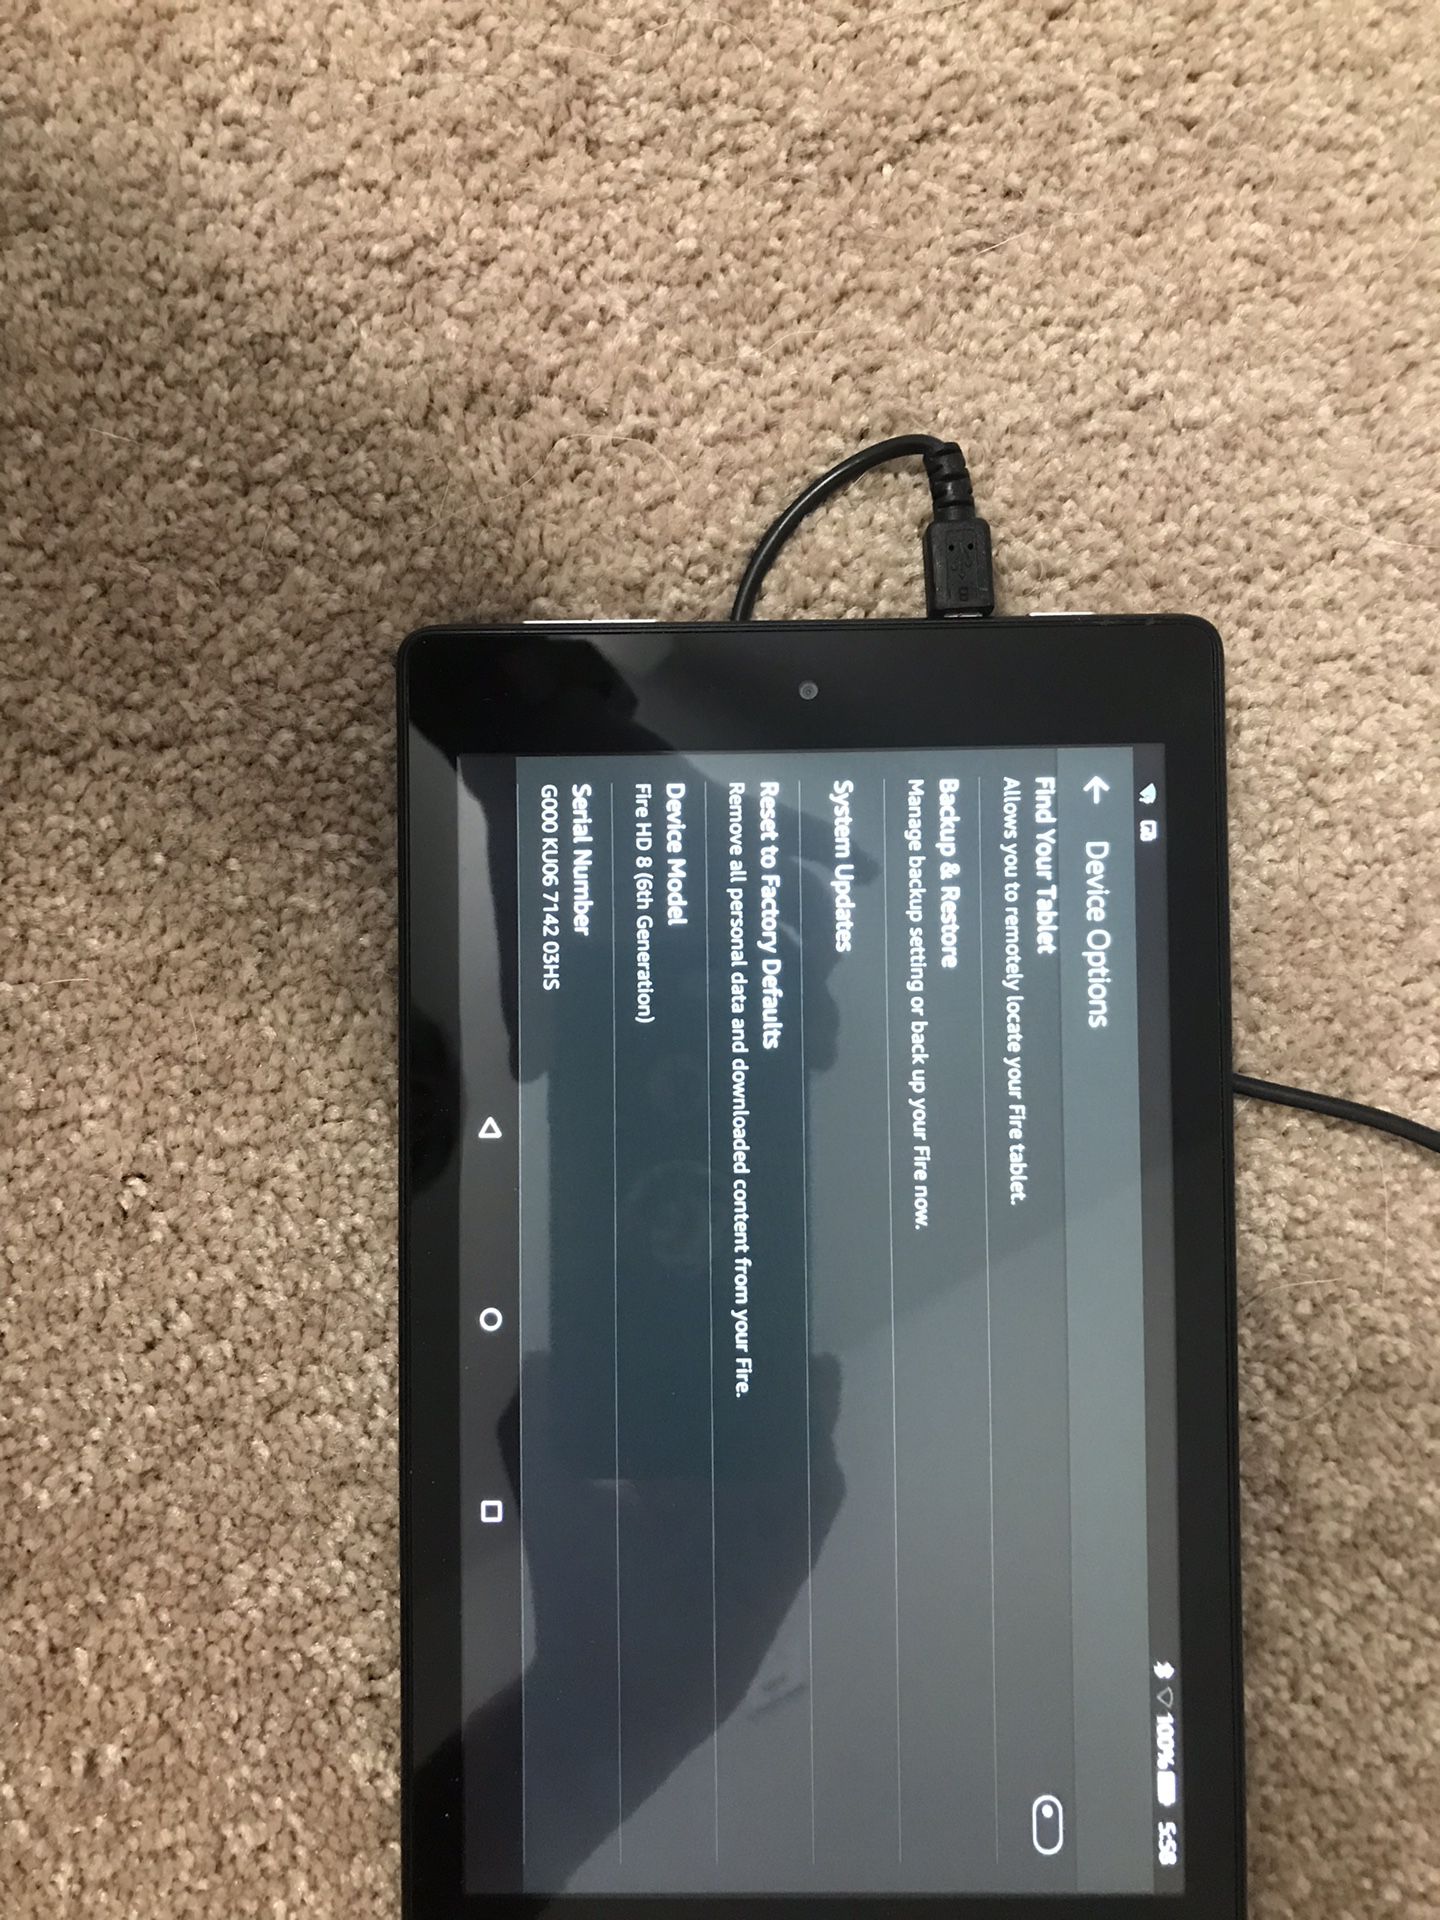 Amazon fire tablet 8 HD 6th generation 16 GB with keyboard case